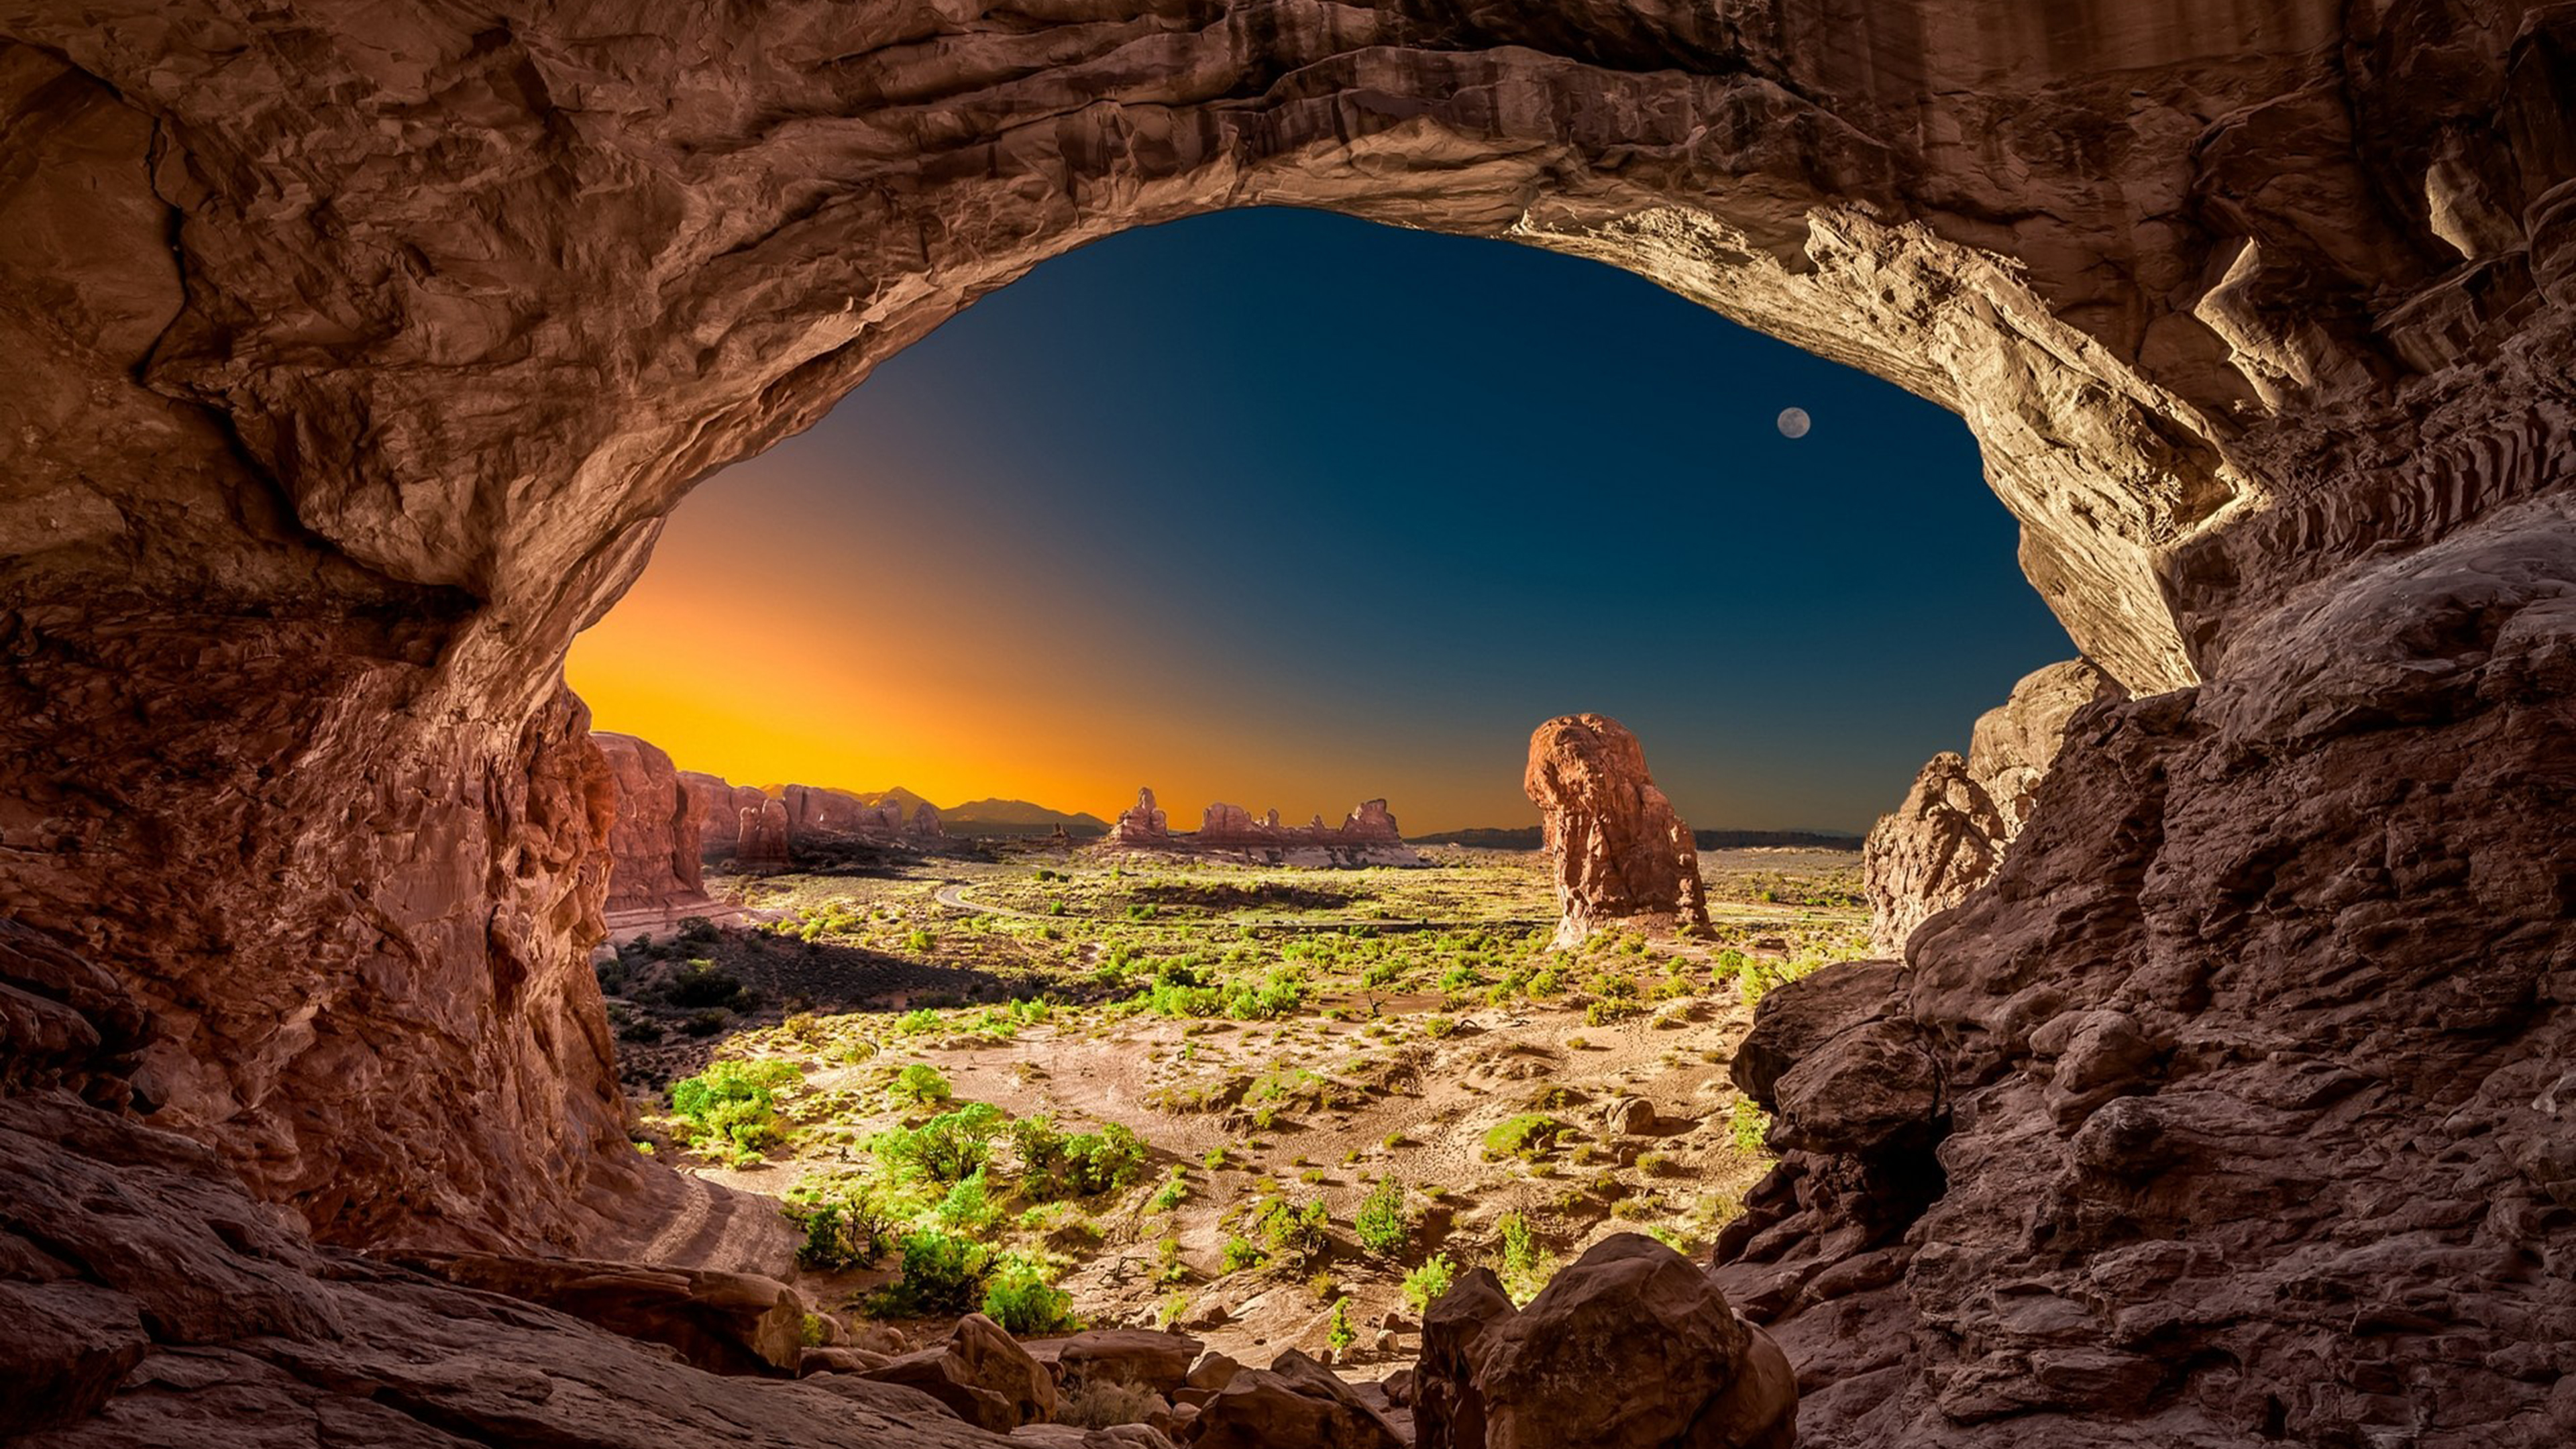 Arches National Park 4k Ultra HD Wallpaper Background Image